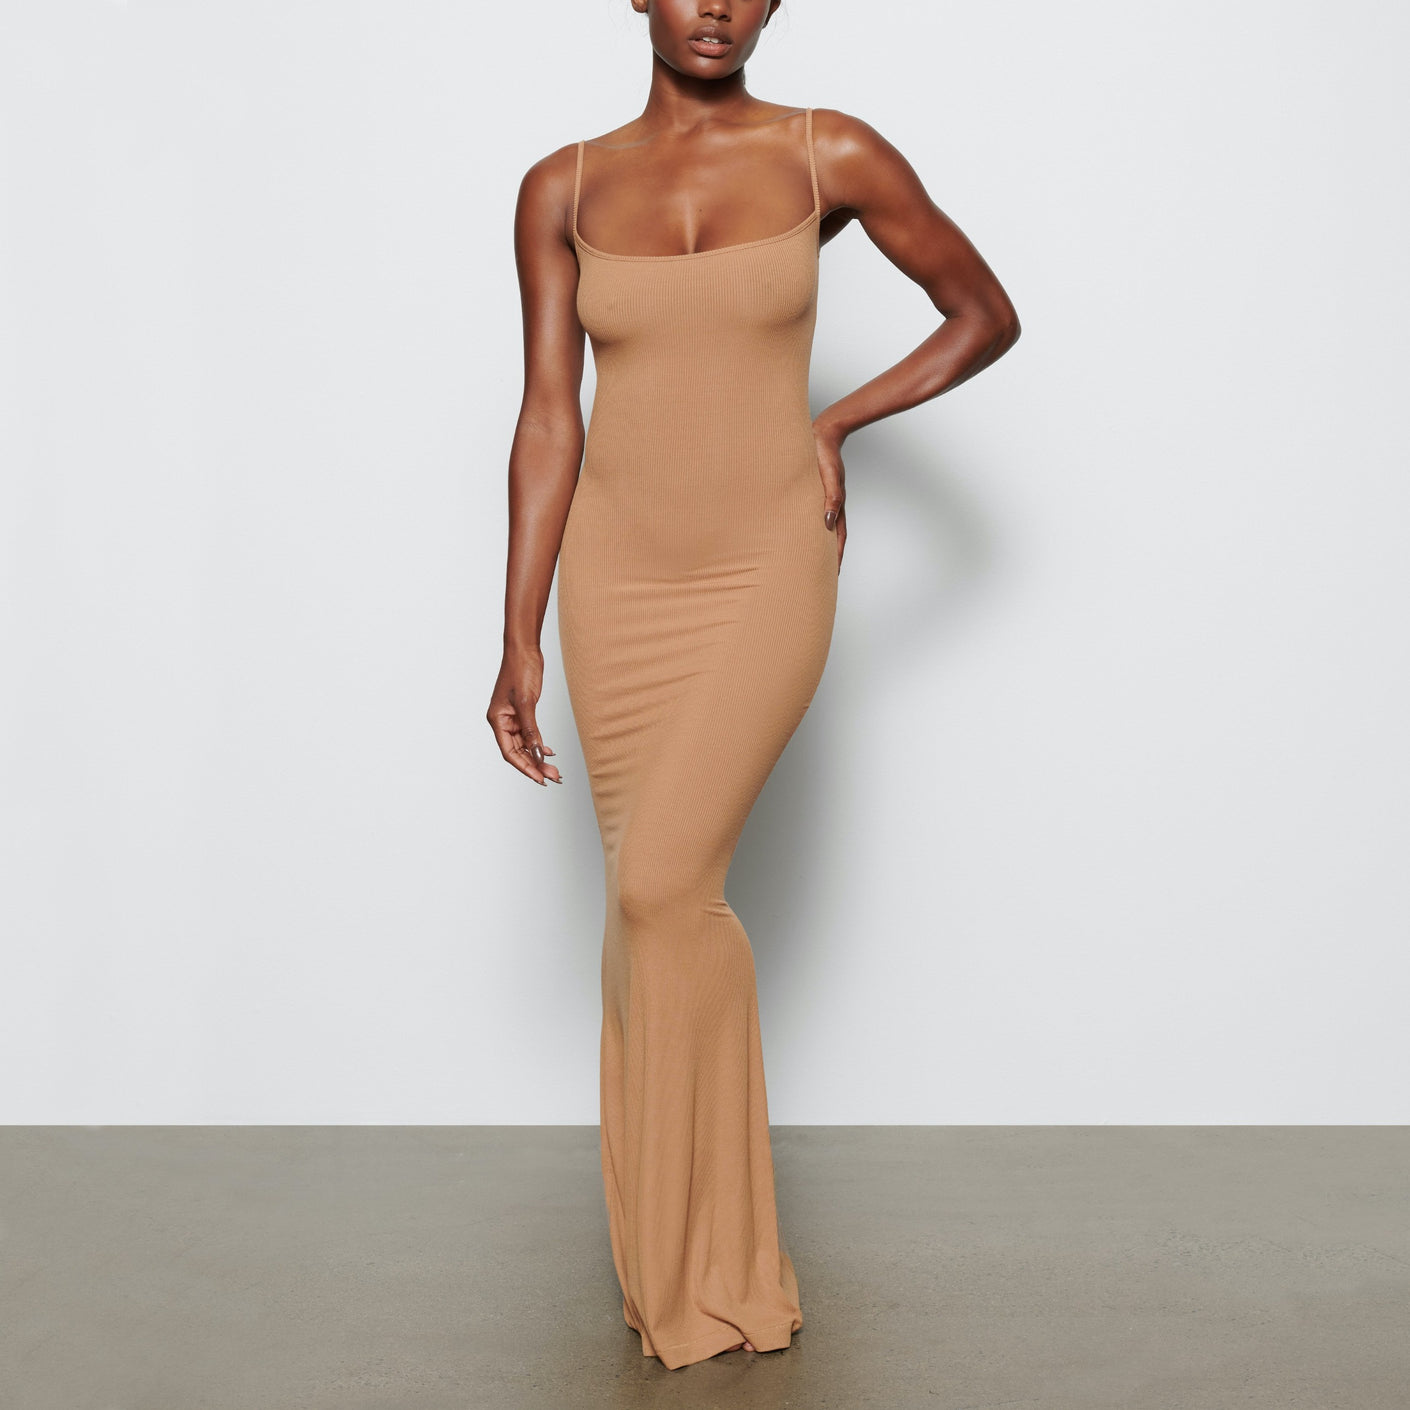 The Soft Lounge Long Slip Dress is coming back. We repeat: It's